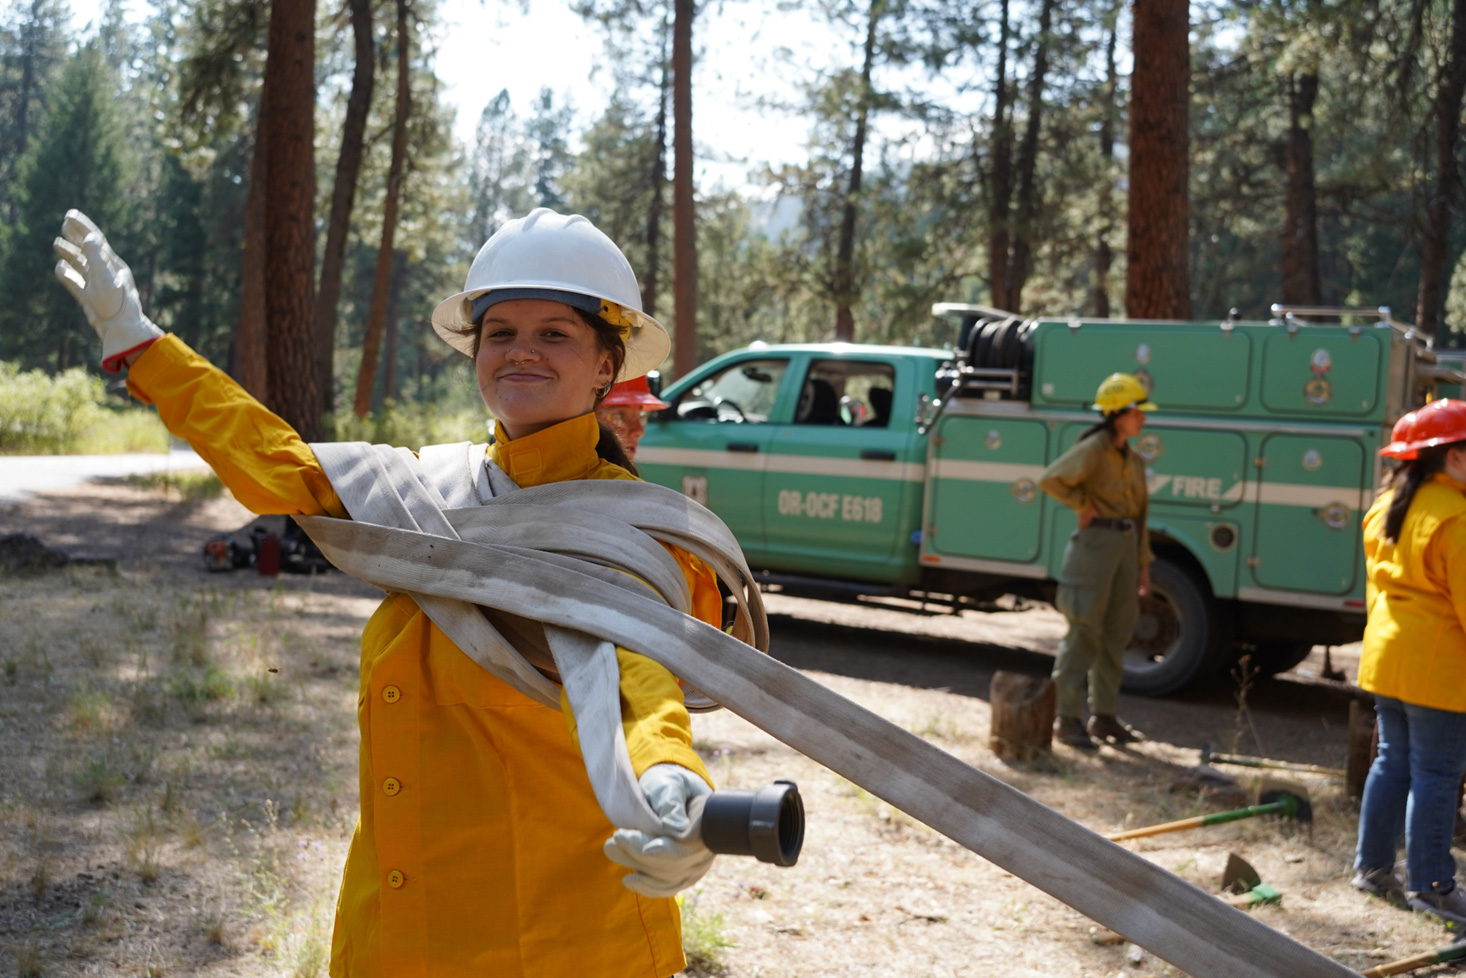 woman in the forest coiling a firehose